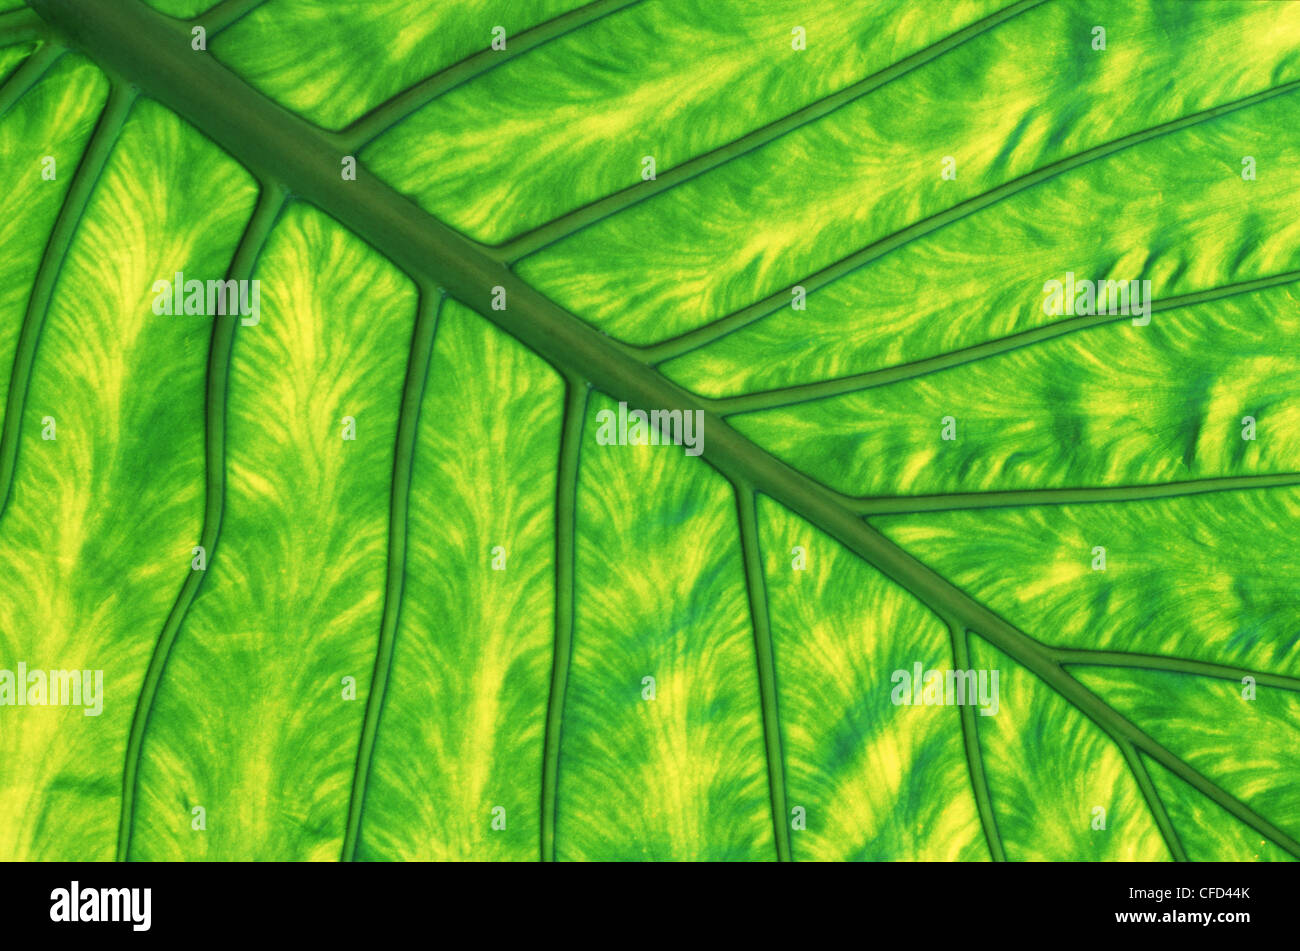 Natural abstract of skunk cabbage leaf patterns detail, British Columbia, Canada. Stock Photo